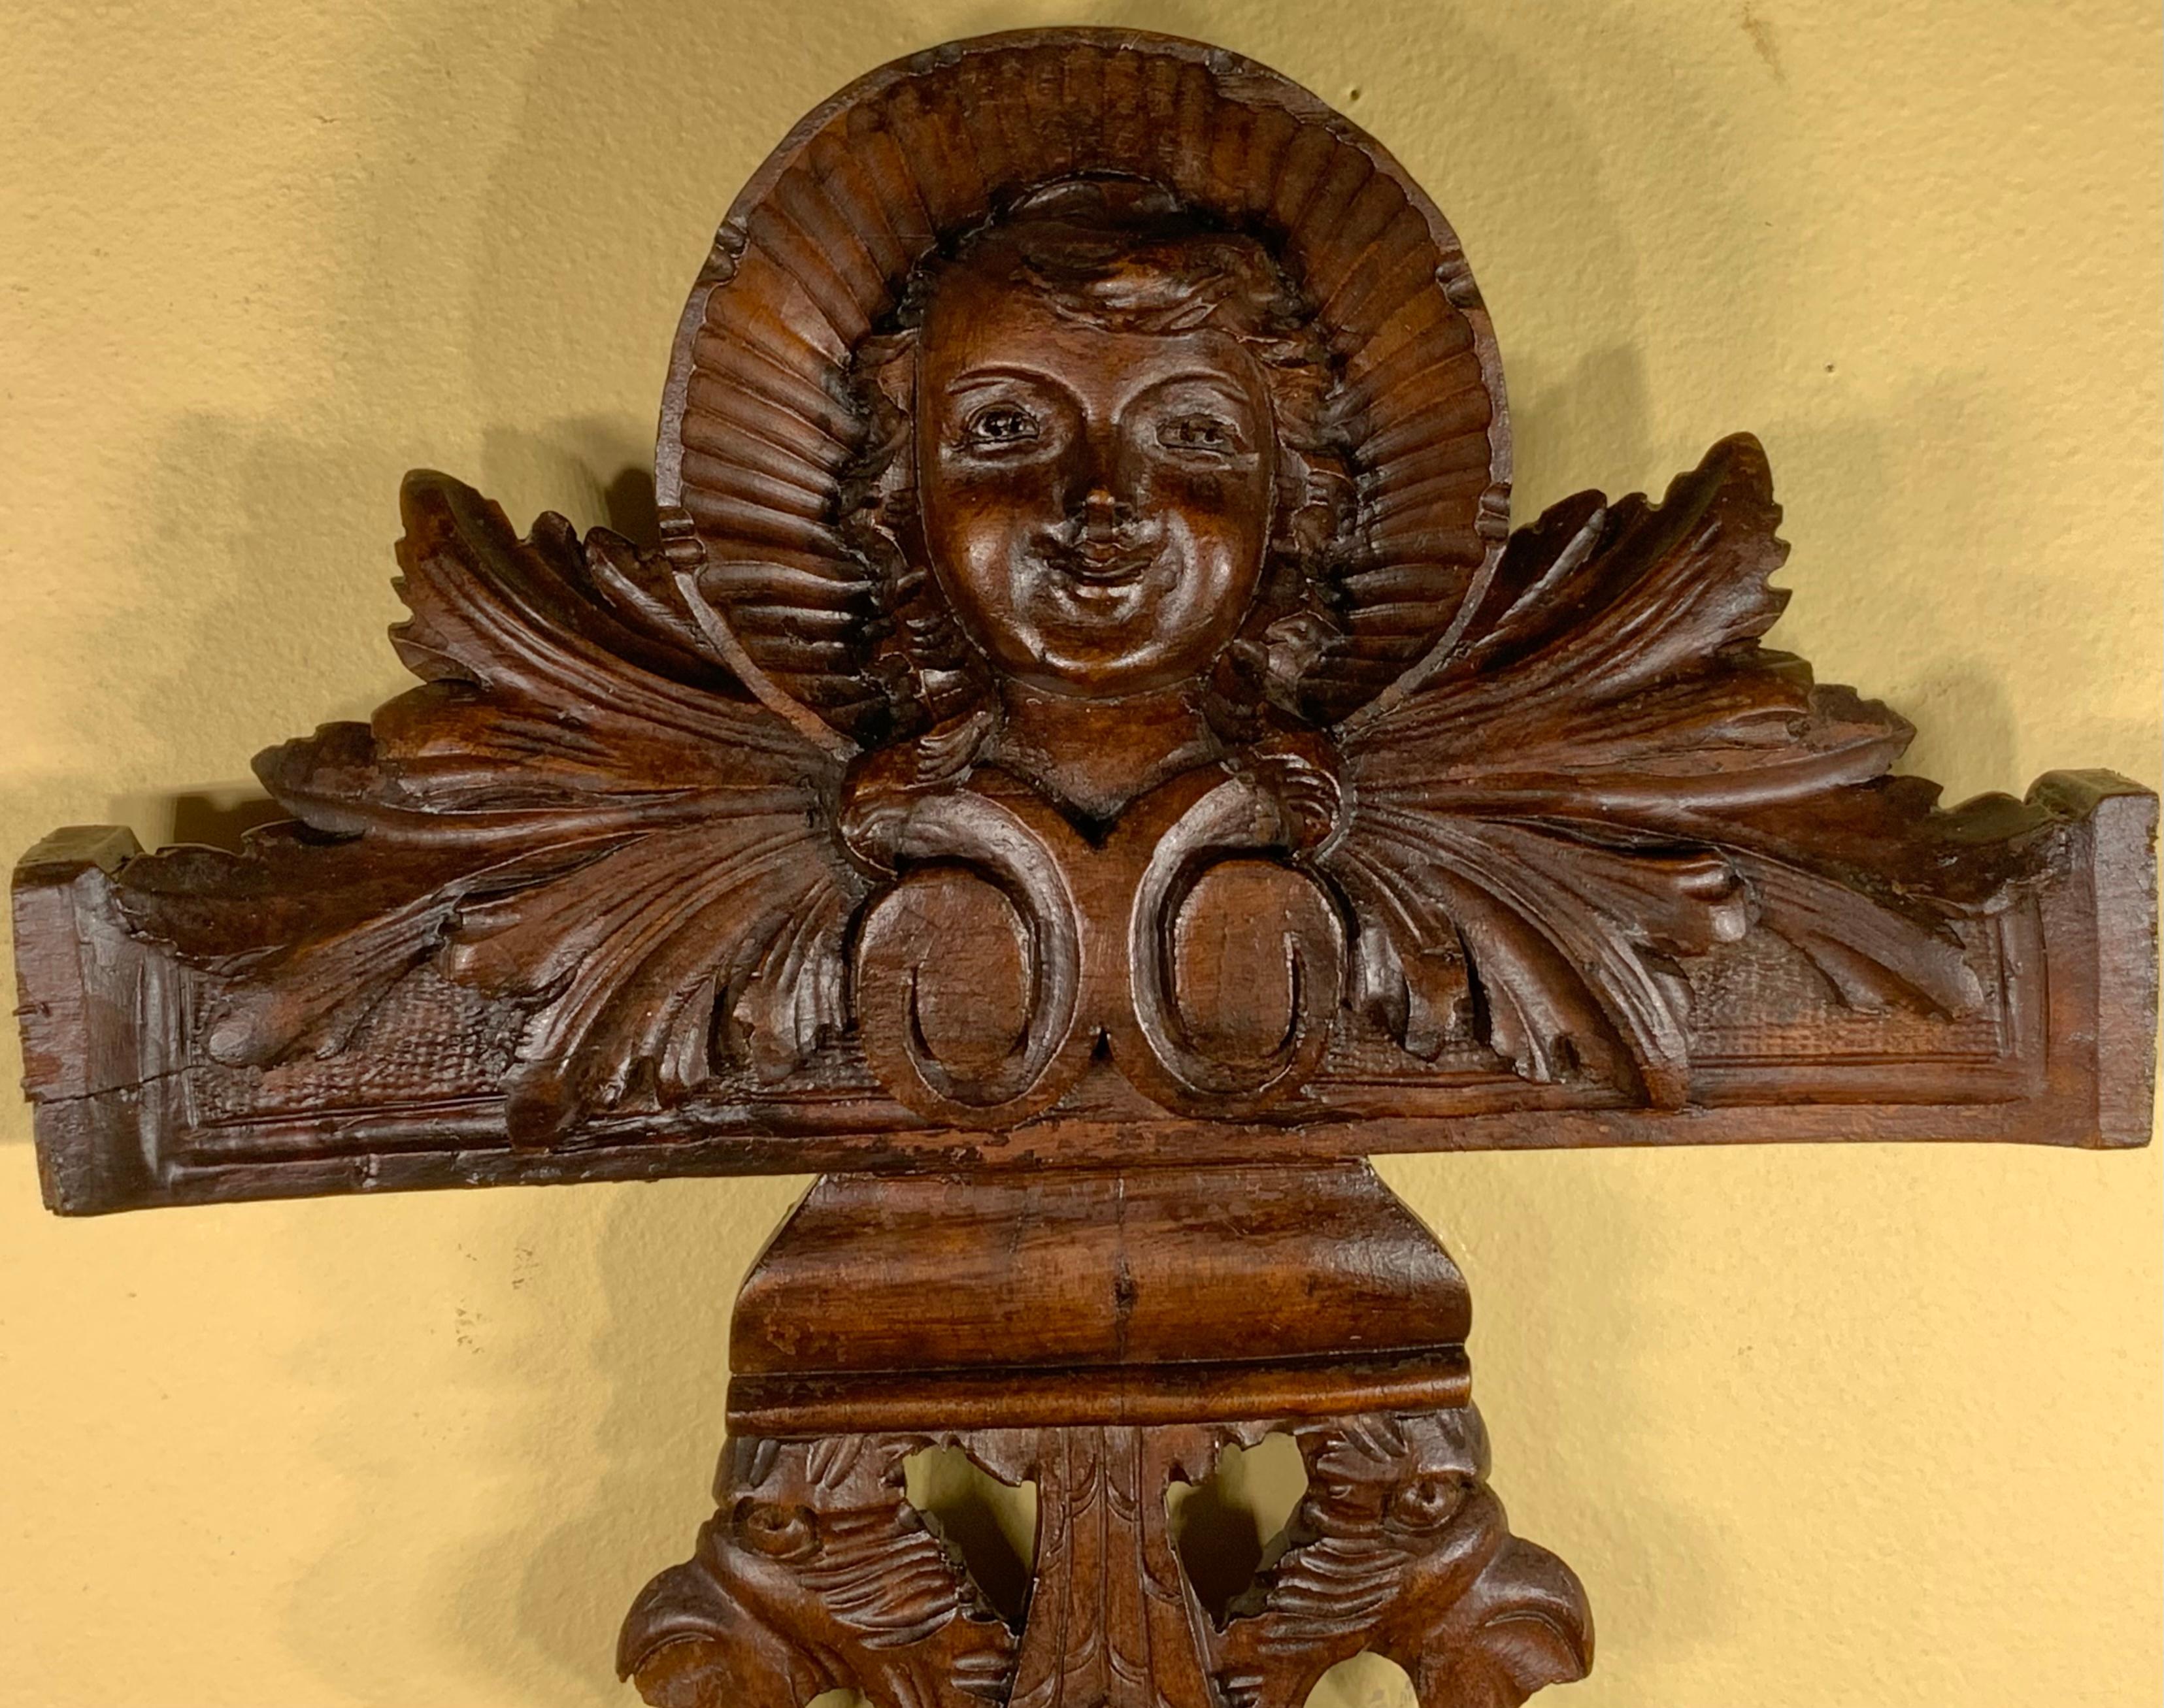 Exceptional hand carved Walnut wood, of beautiful cherub face looking forward and very intricate and intriguing bottom carving.
This 19th century decorative piece was salvege from part of antique furniture, restored and refinished to become one of